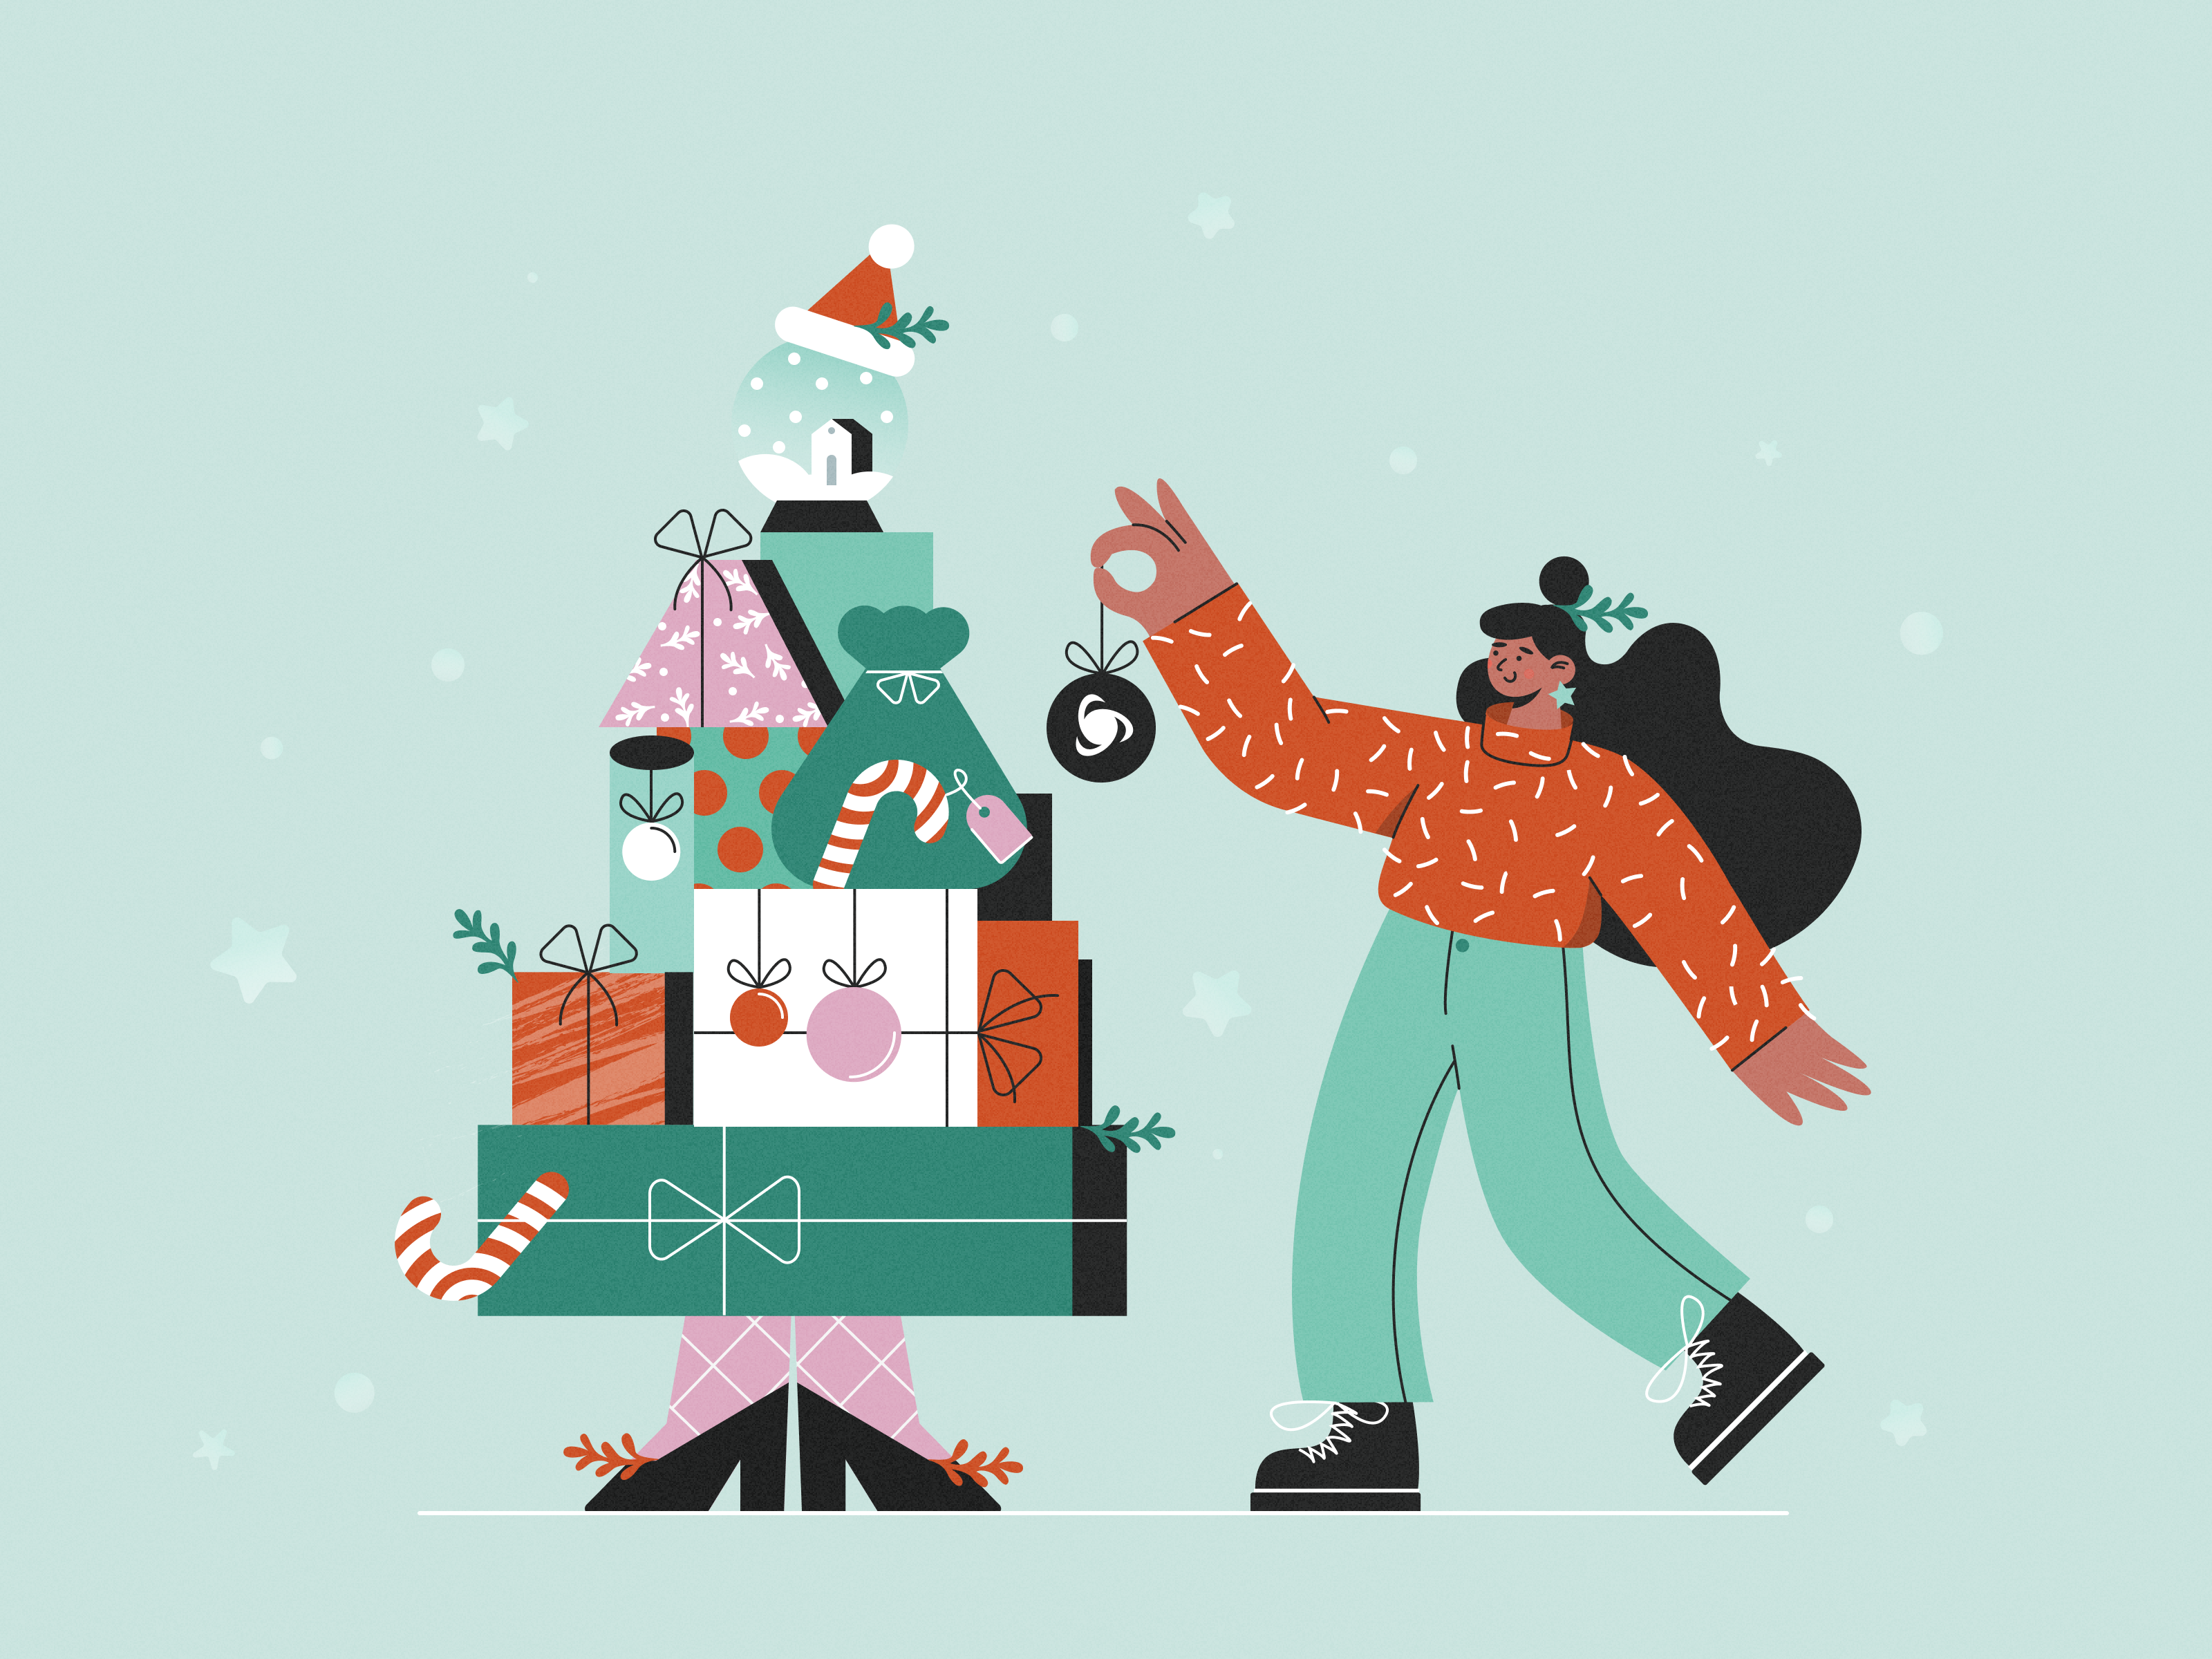 Merrychristmas designs, themes, templates and downloadable graphic elements on Dribbble